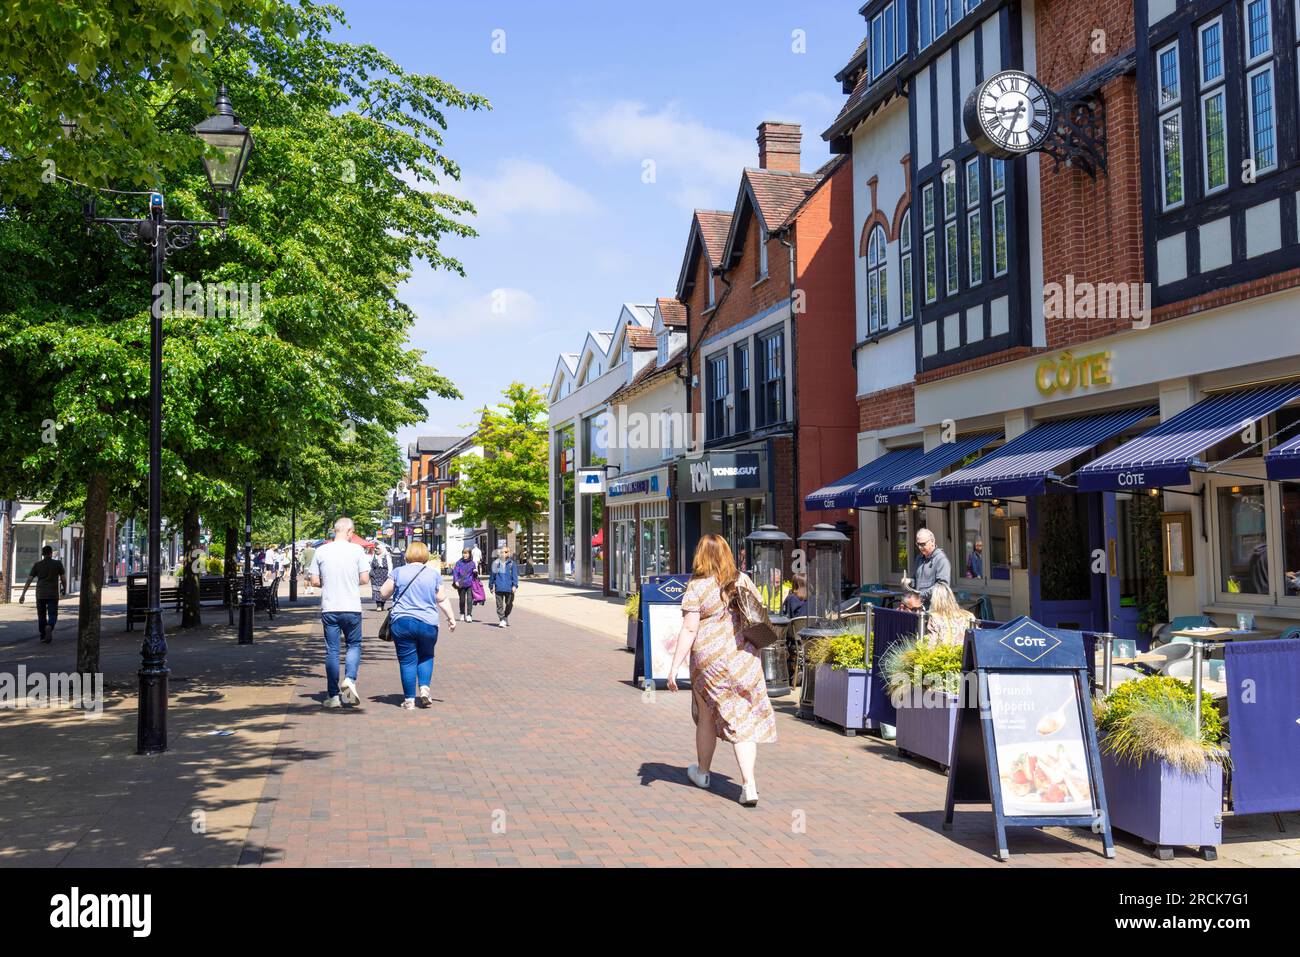 Solihull town centre with shops and Cote restaurant Solihull High street Solihull West Midlands England UK GB Europe Stock Photo